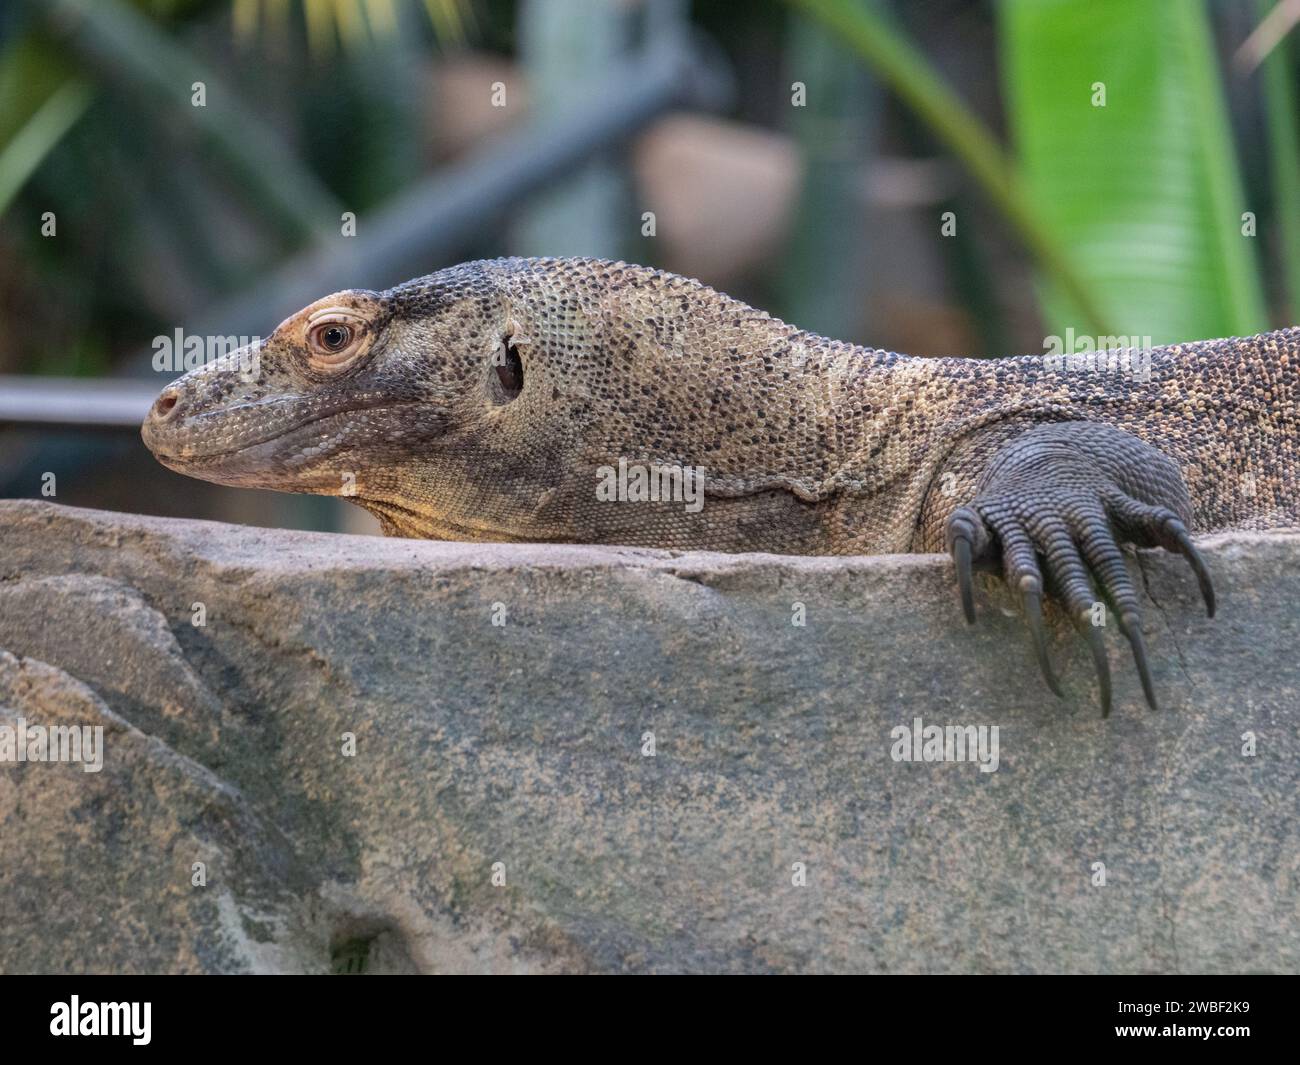 A monitor lizard perched atop a large jagged rock, surveying its surroundings with its keen eyes Stock Photo